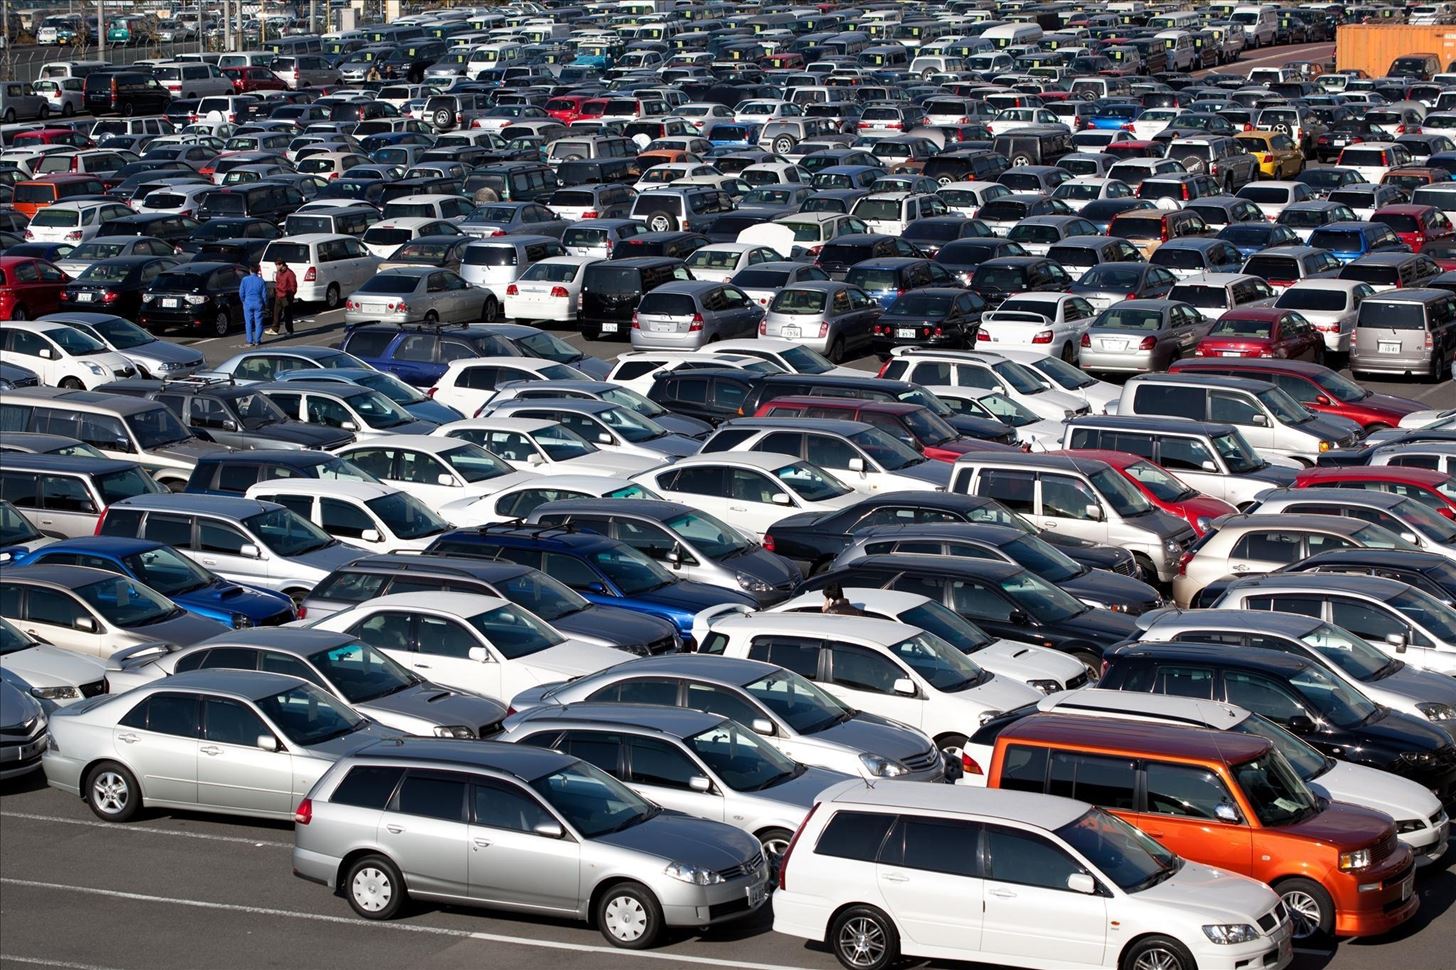 Forgot Where You Parked? Locate Your Lost Car Using These Free Mobile Apps